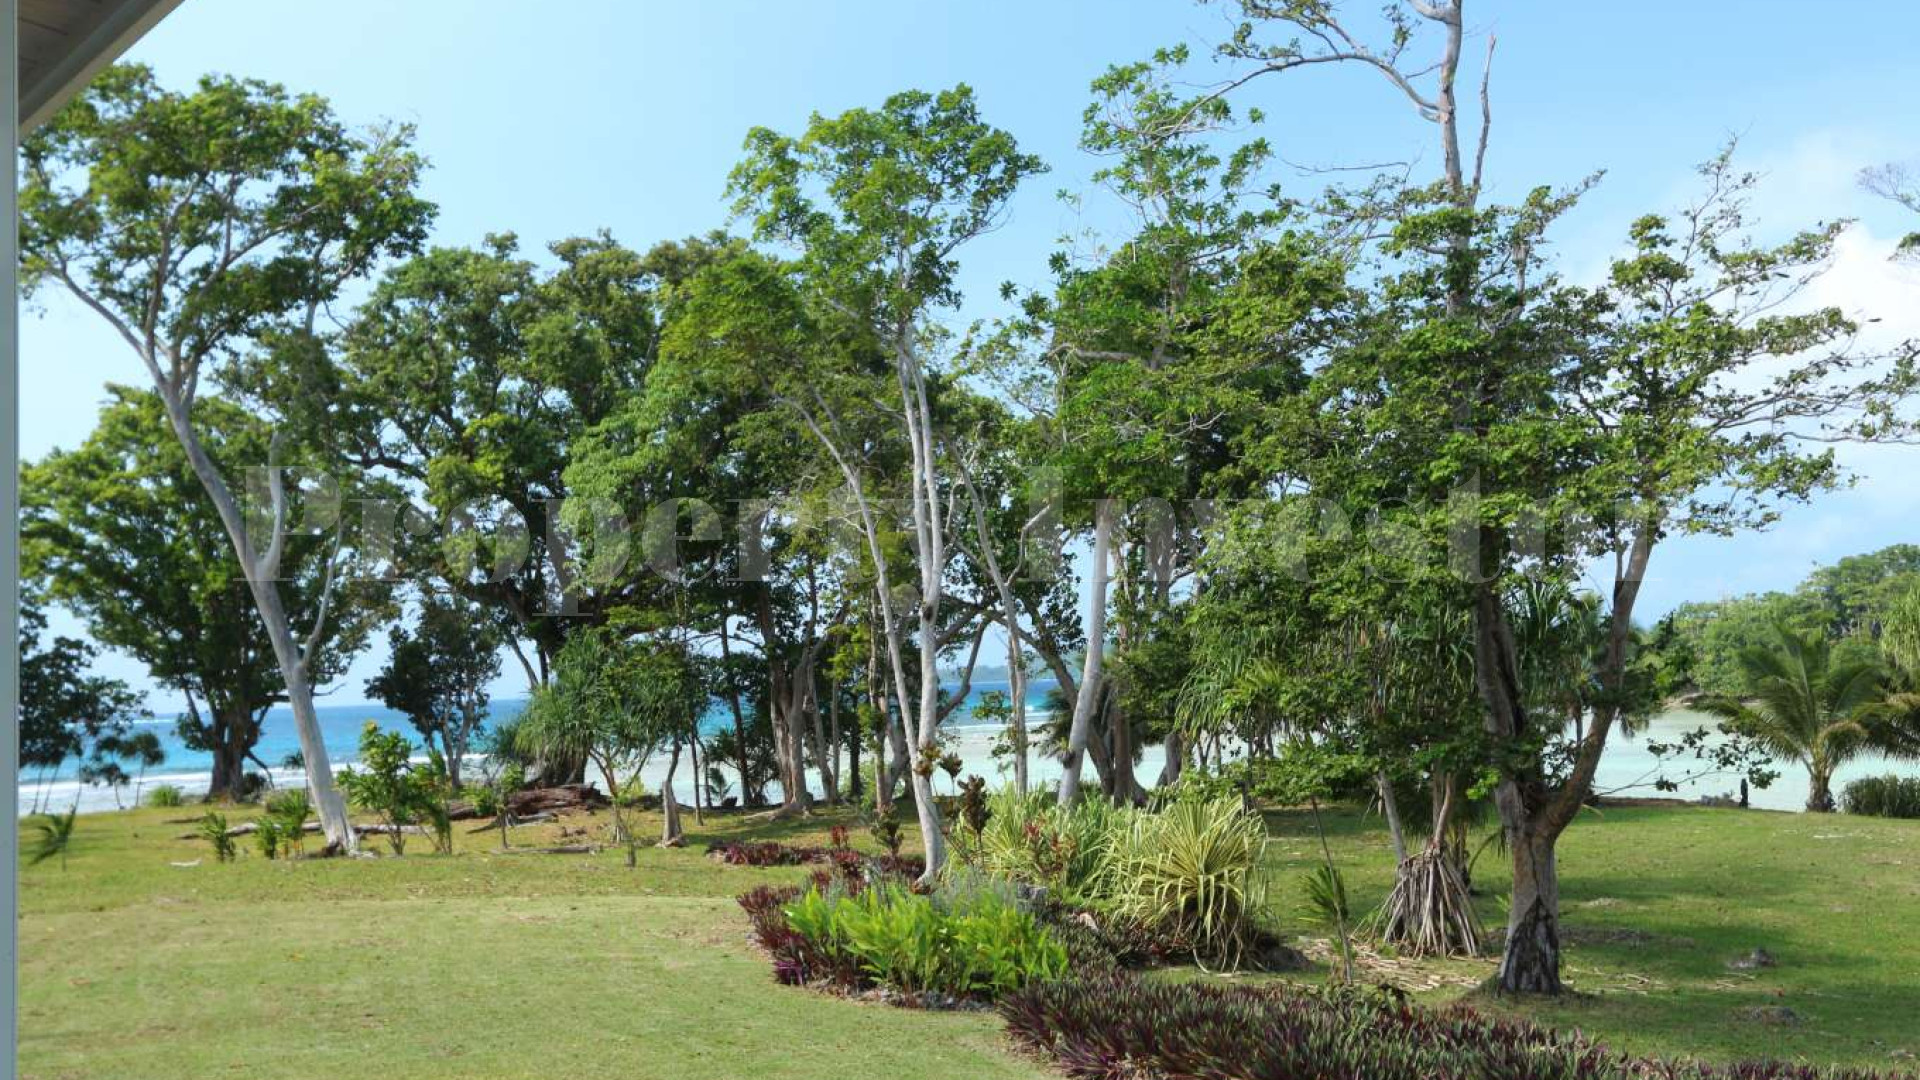 Wonderfully Lush 10.6 Hectare Private Island with Residence for Sale in Vanuatu